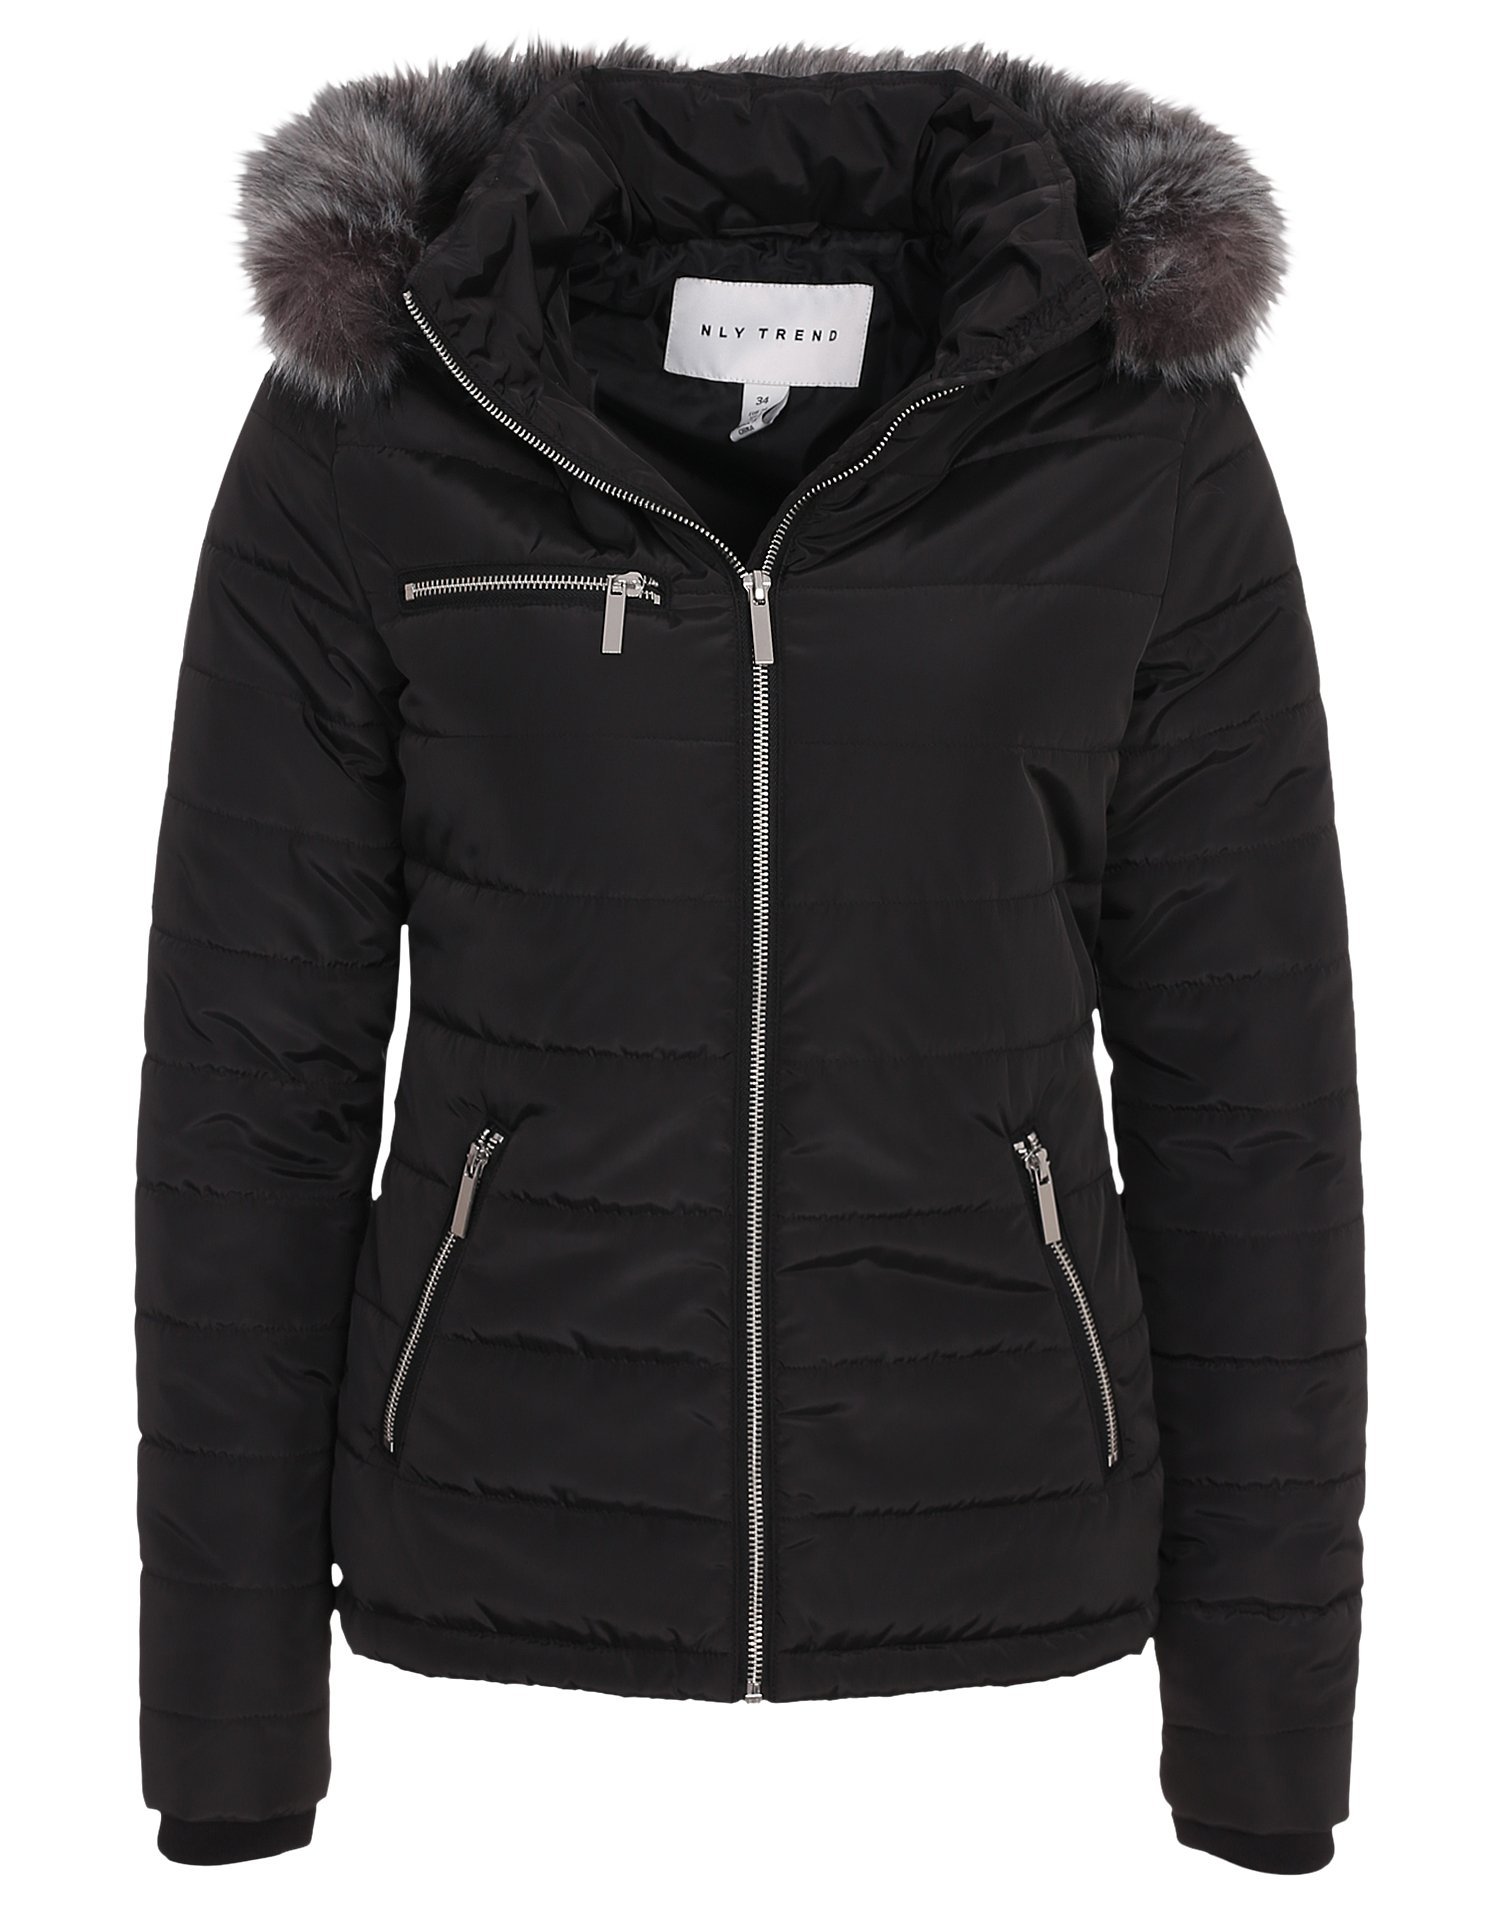 Puffer Fur Jacket - Nly Trend - Black - Jackets - Clothing - Women ...